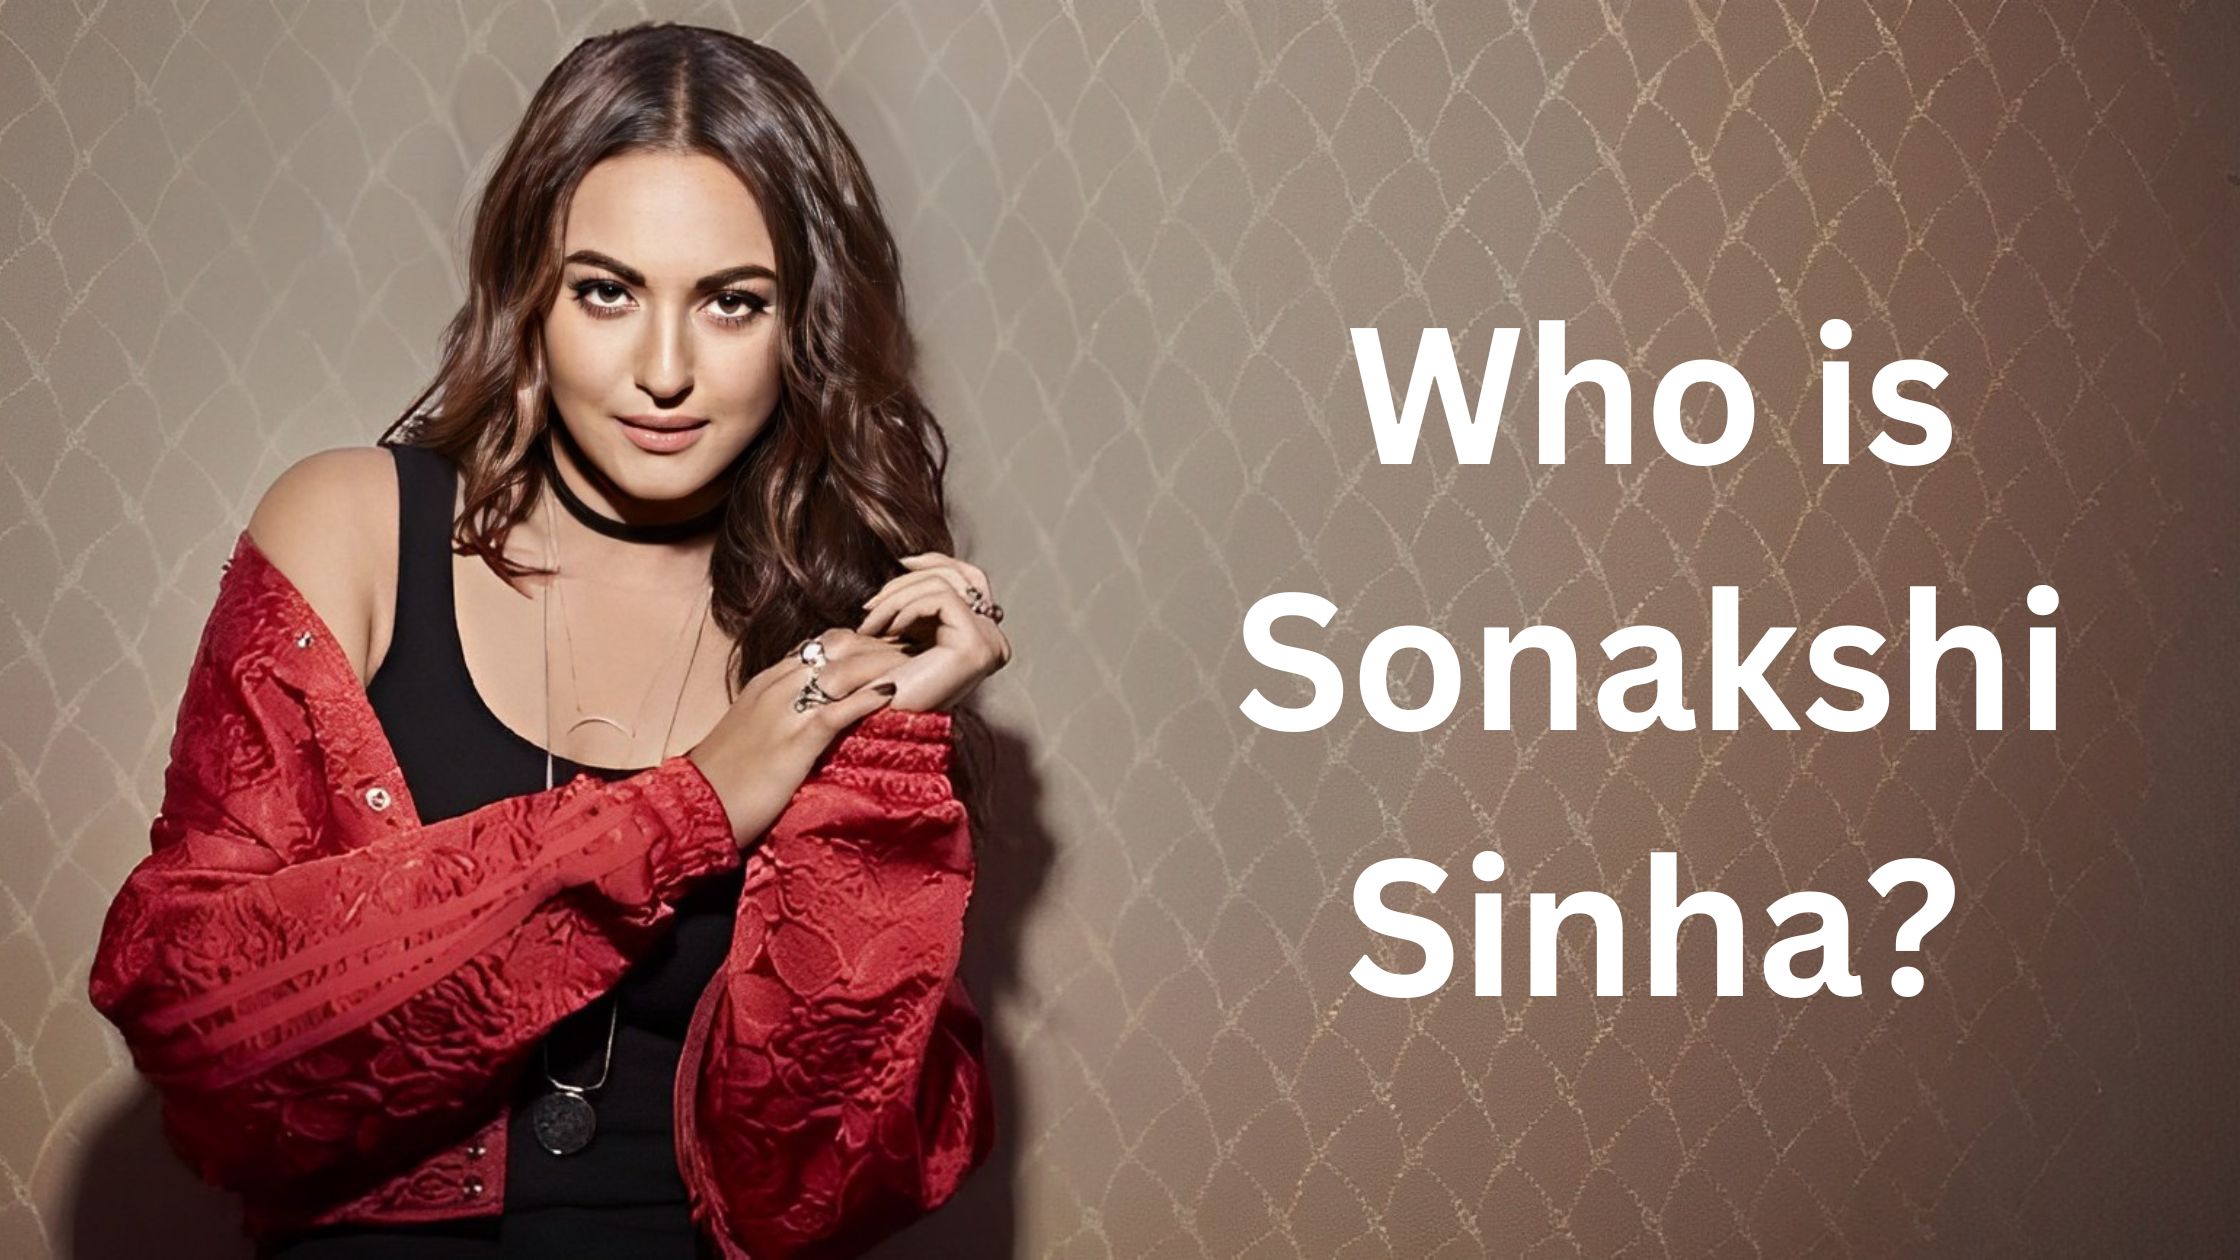 Sonakshi Sinha Age Xxnx - Sonakshi Sinha Biography, Journey, Movies and Many More Facts.